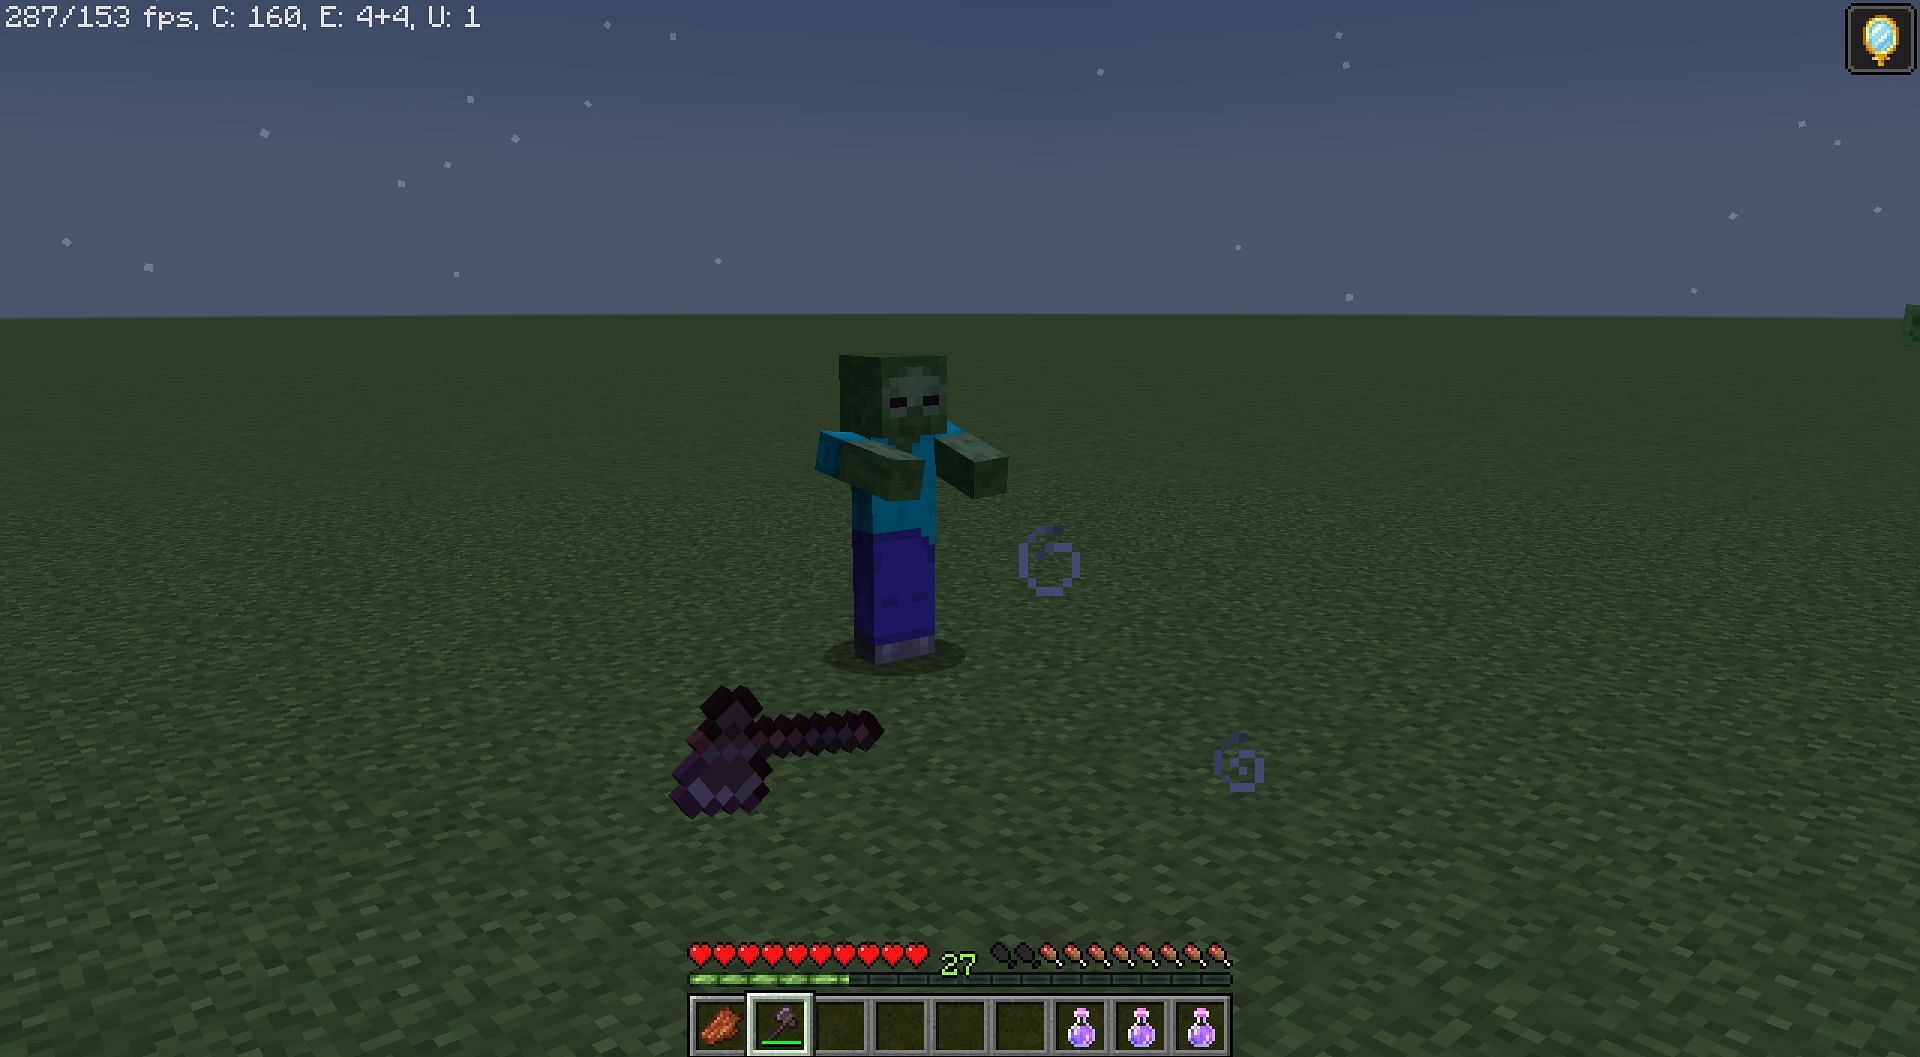 Zombie unable to see the player if no armor is worn (Image via Minecraft)